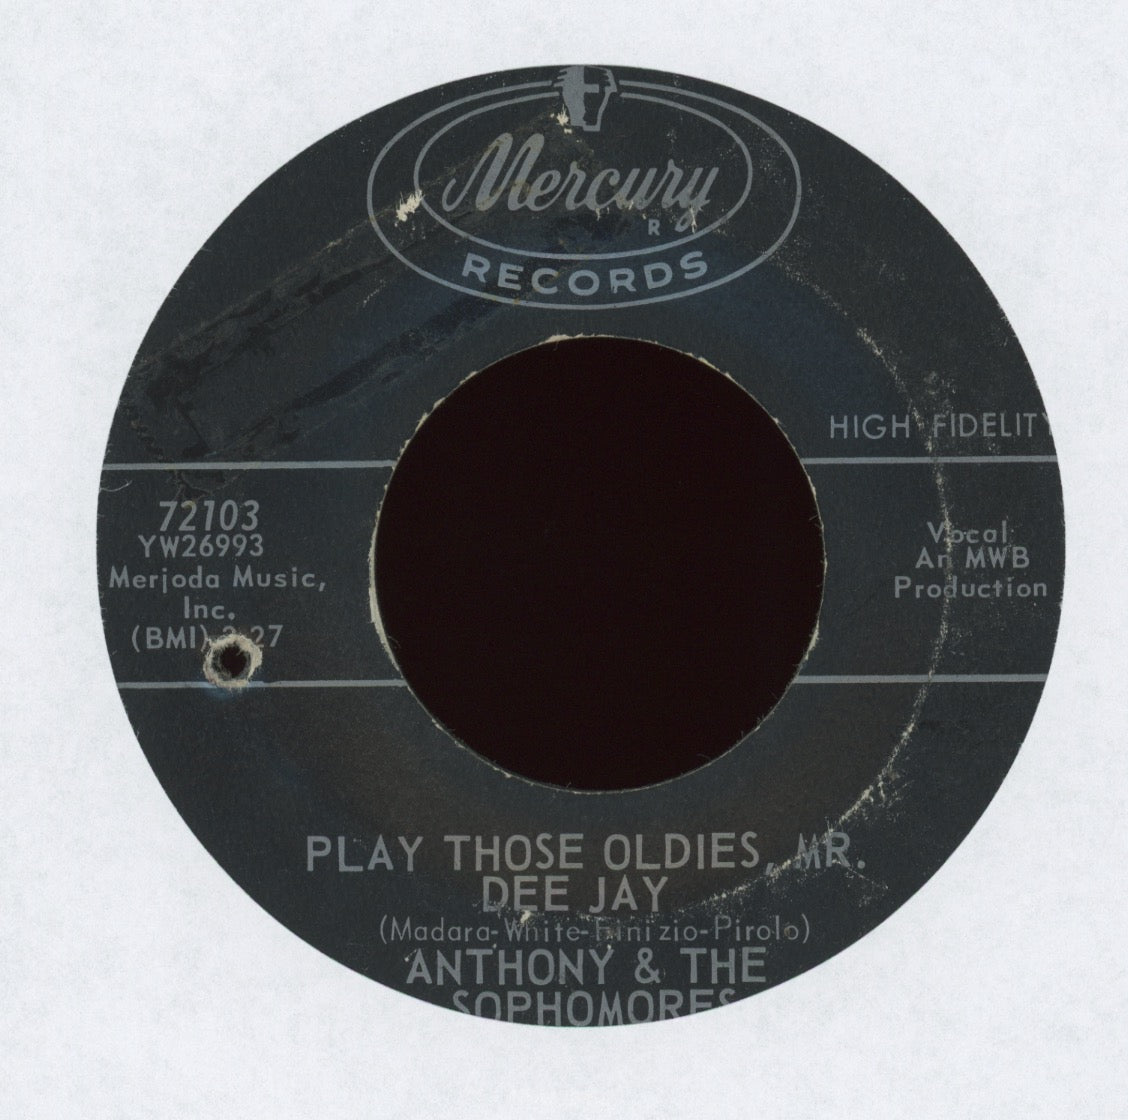 Anthony & The Sophomores - Play Those Oldies, Mr. Dee Jay on Mercury